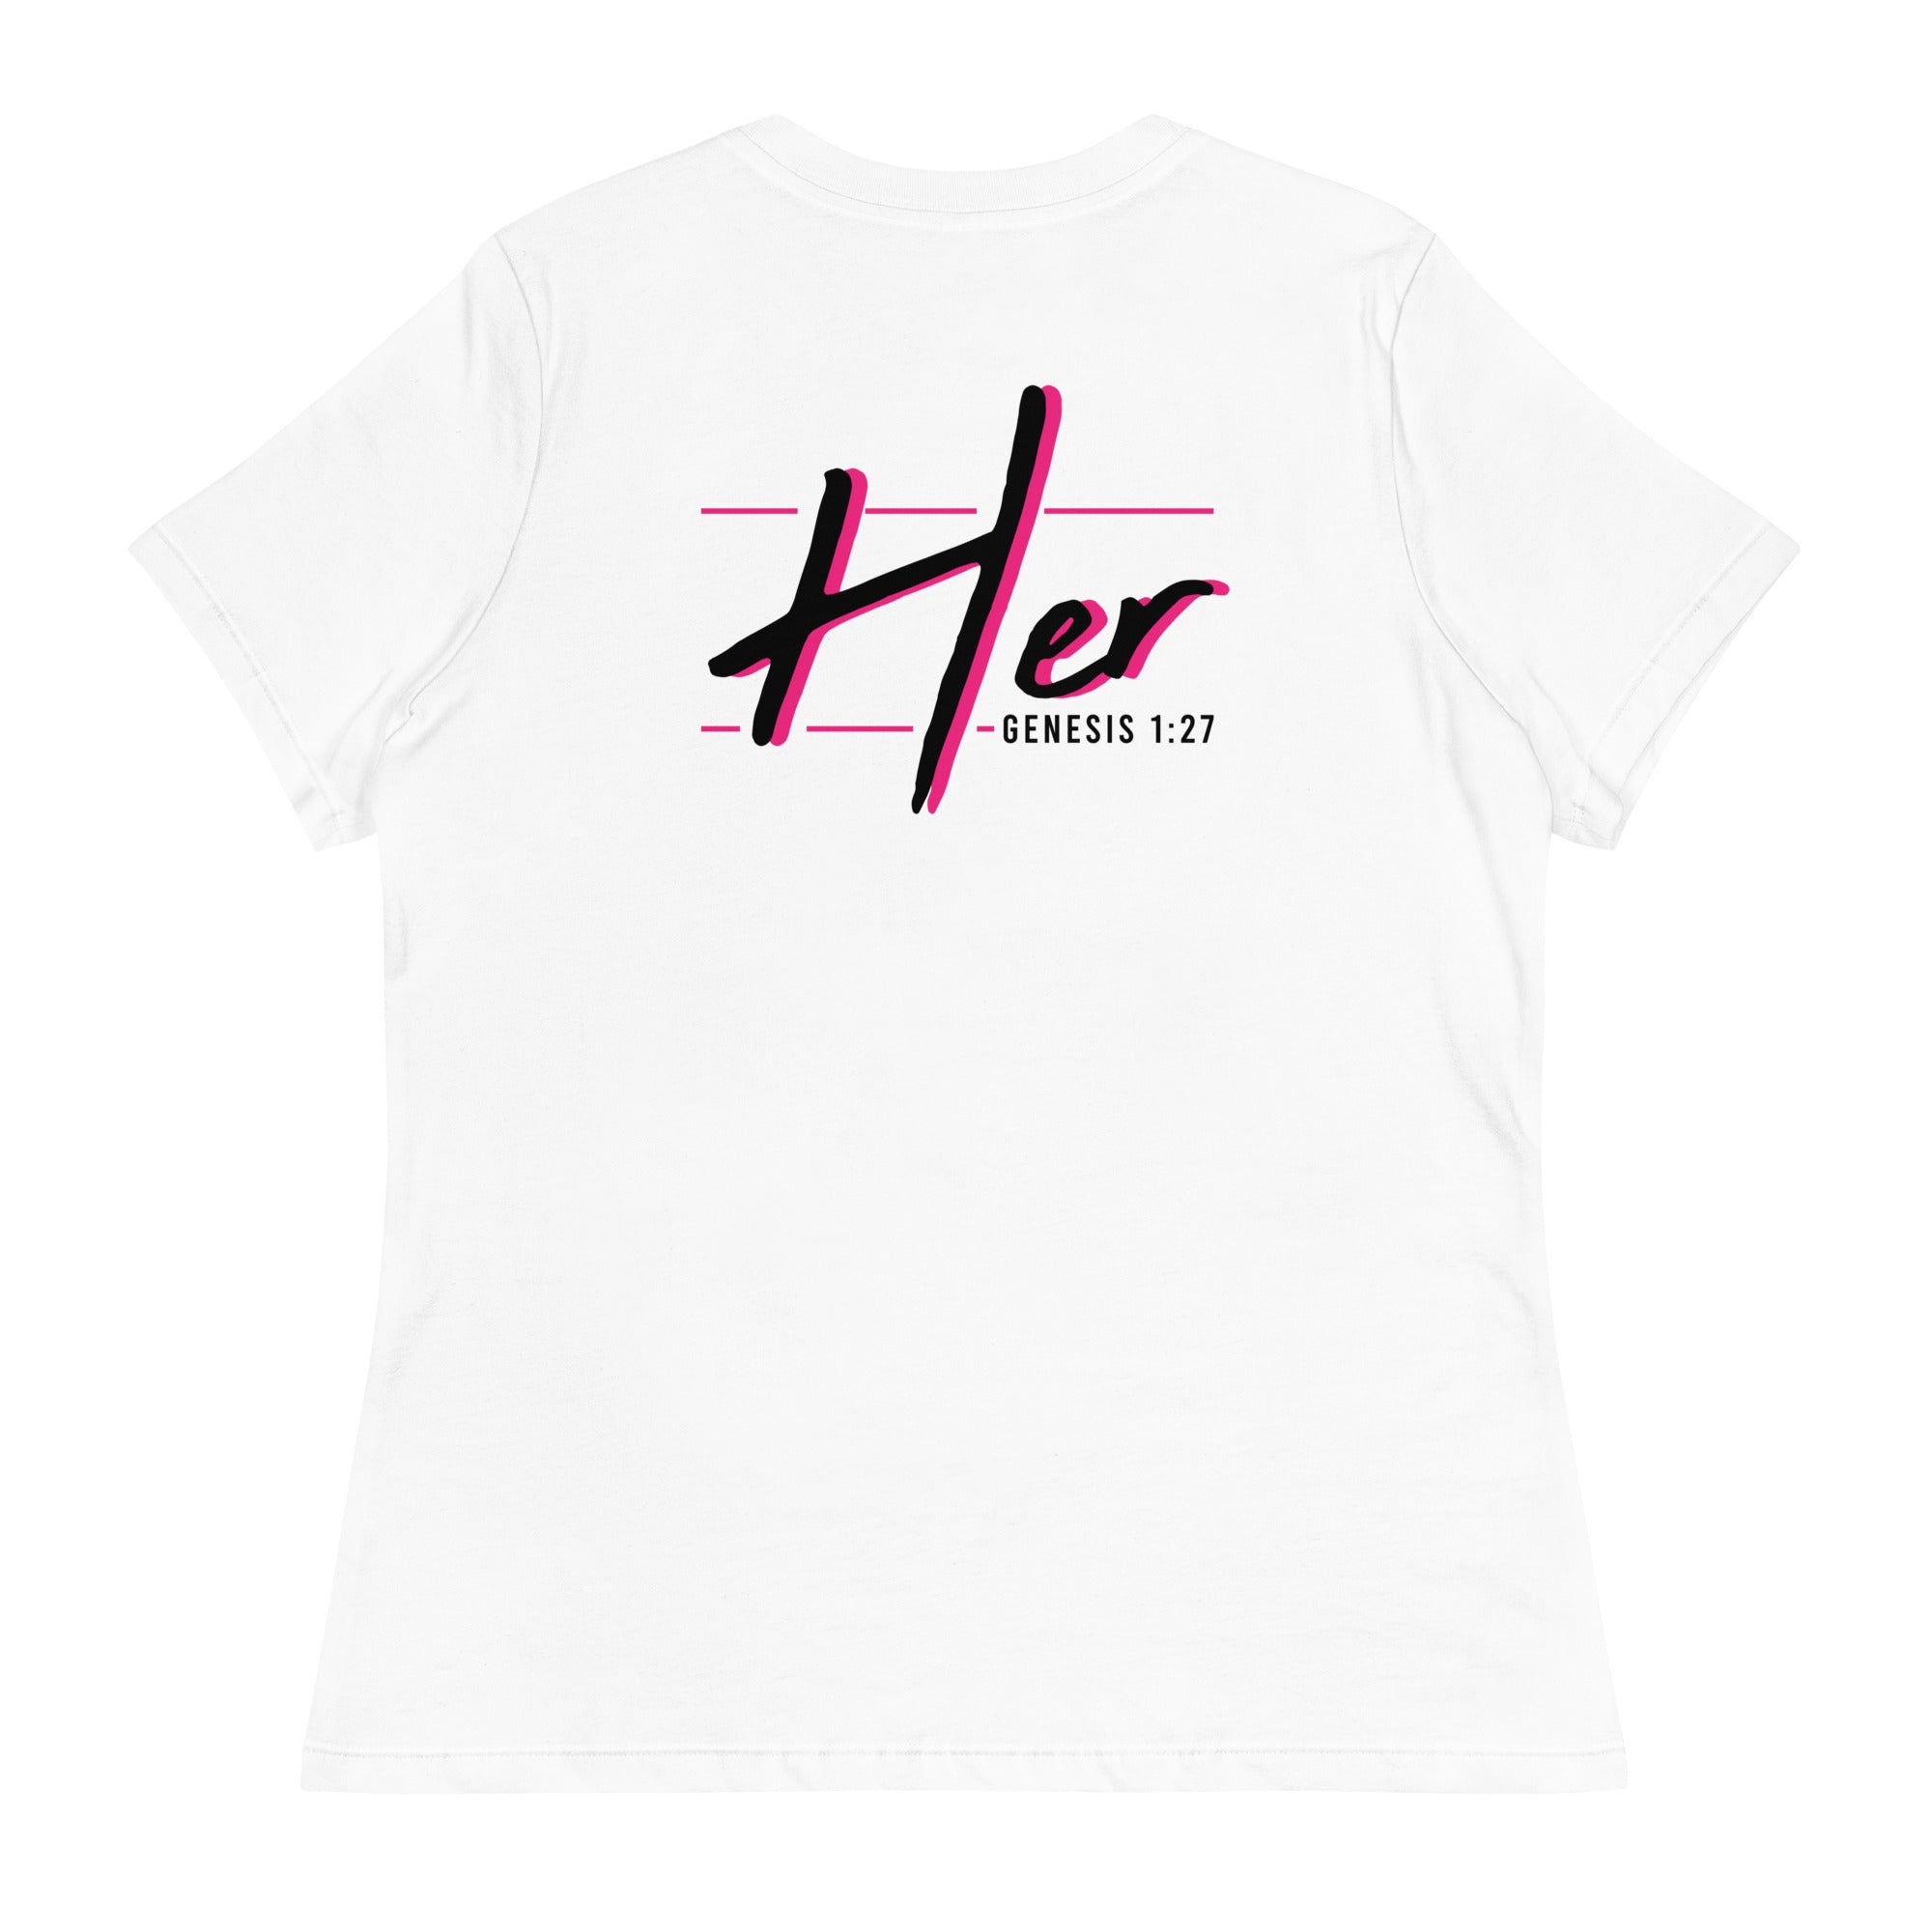 I AM HER WOMENS FRONT AND BACK T-SHIRT